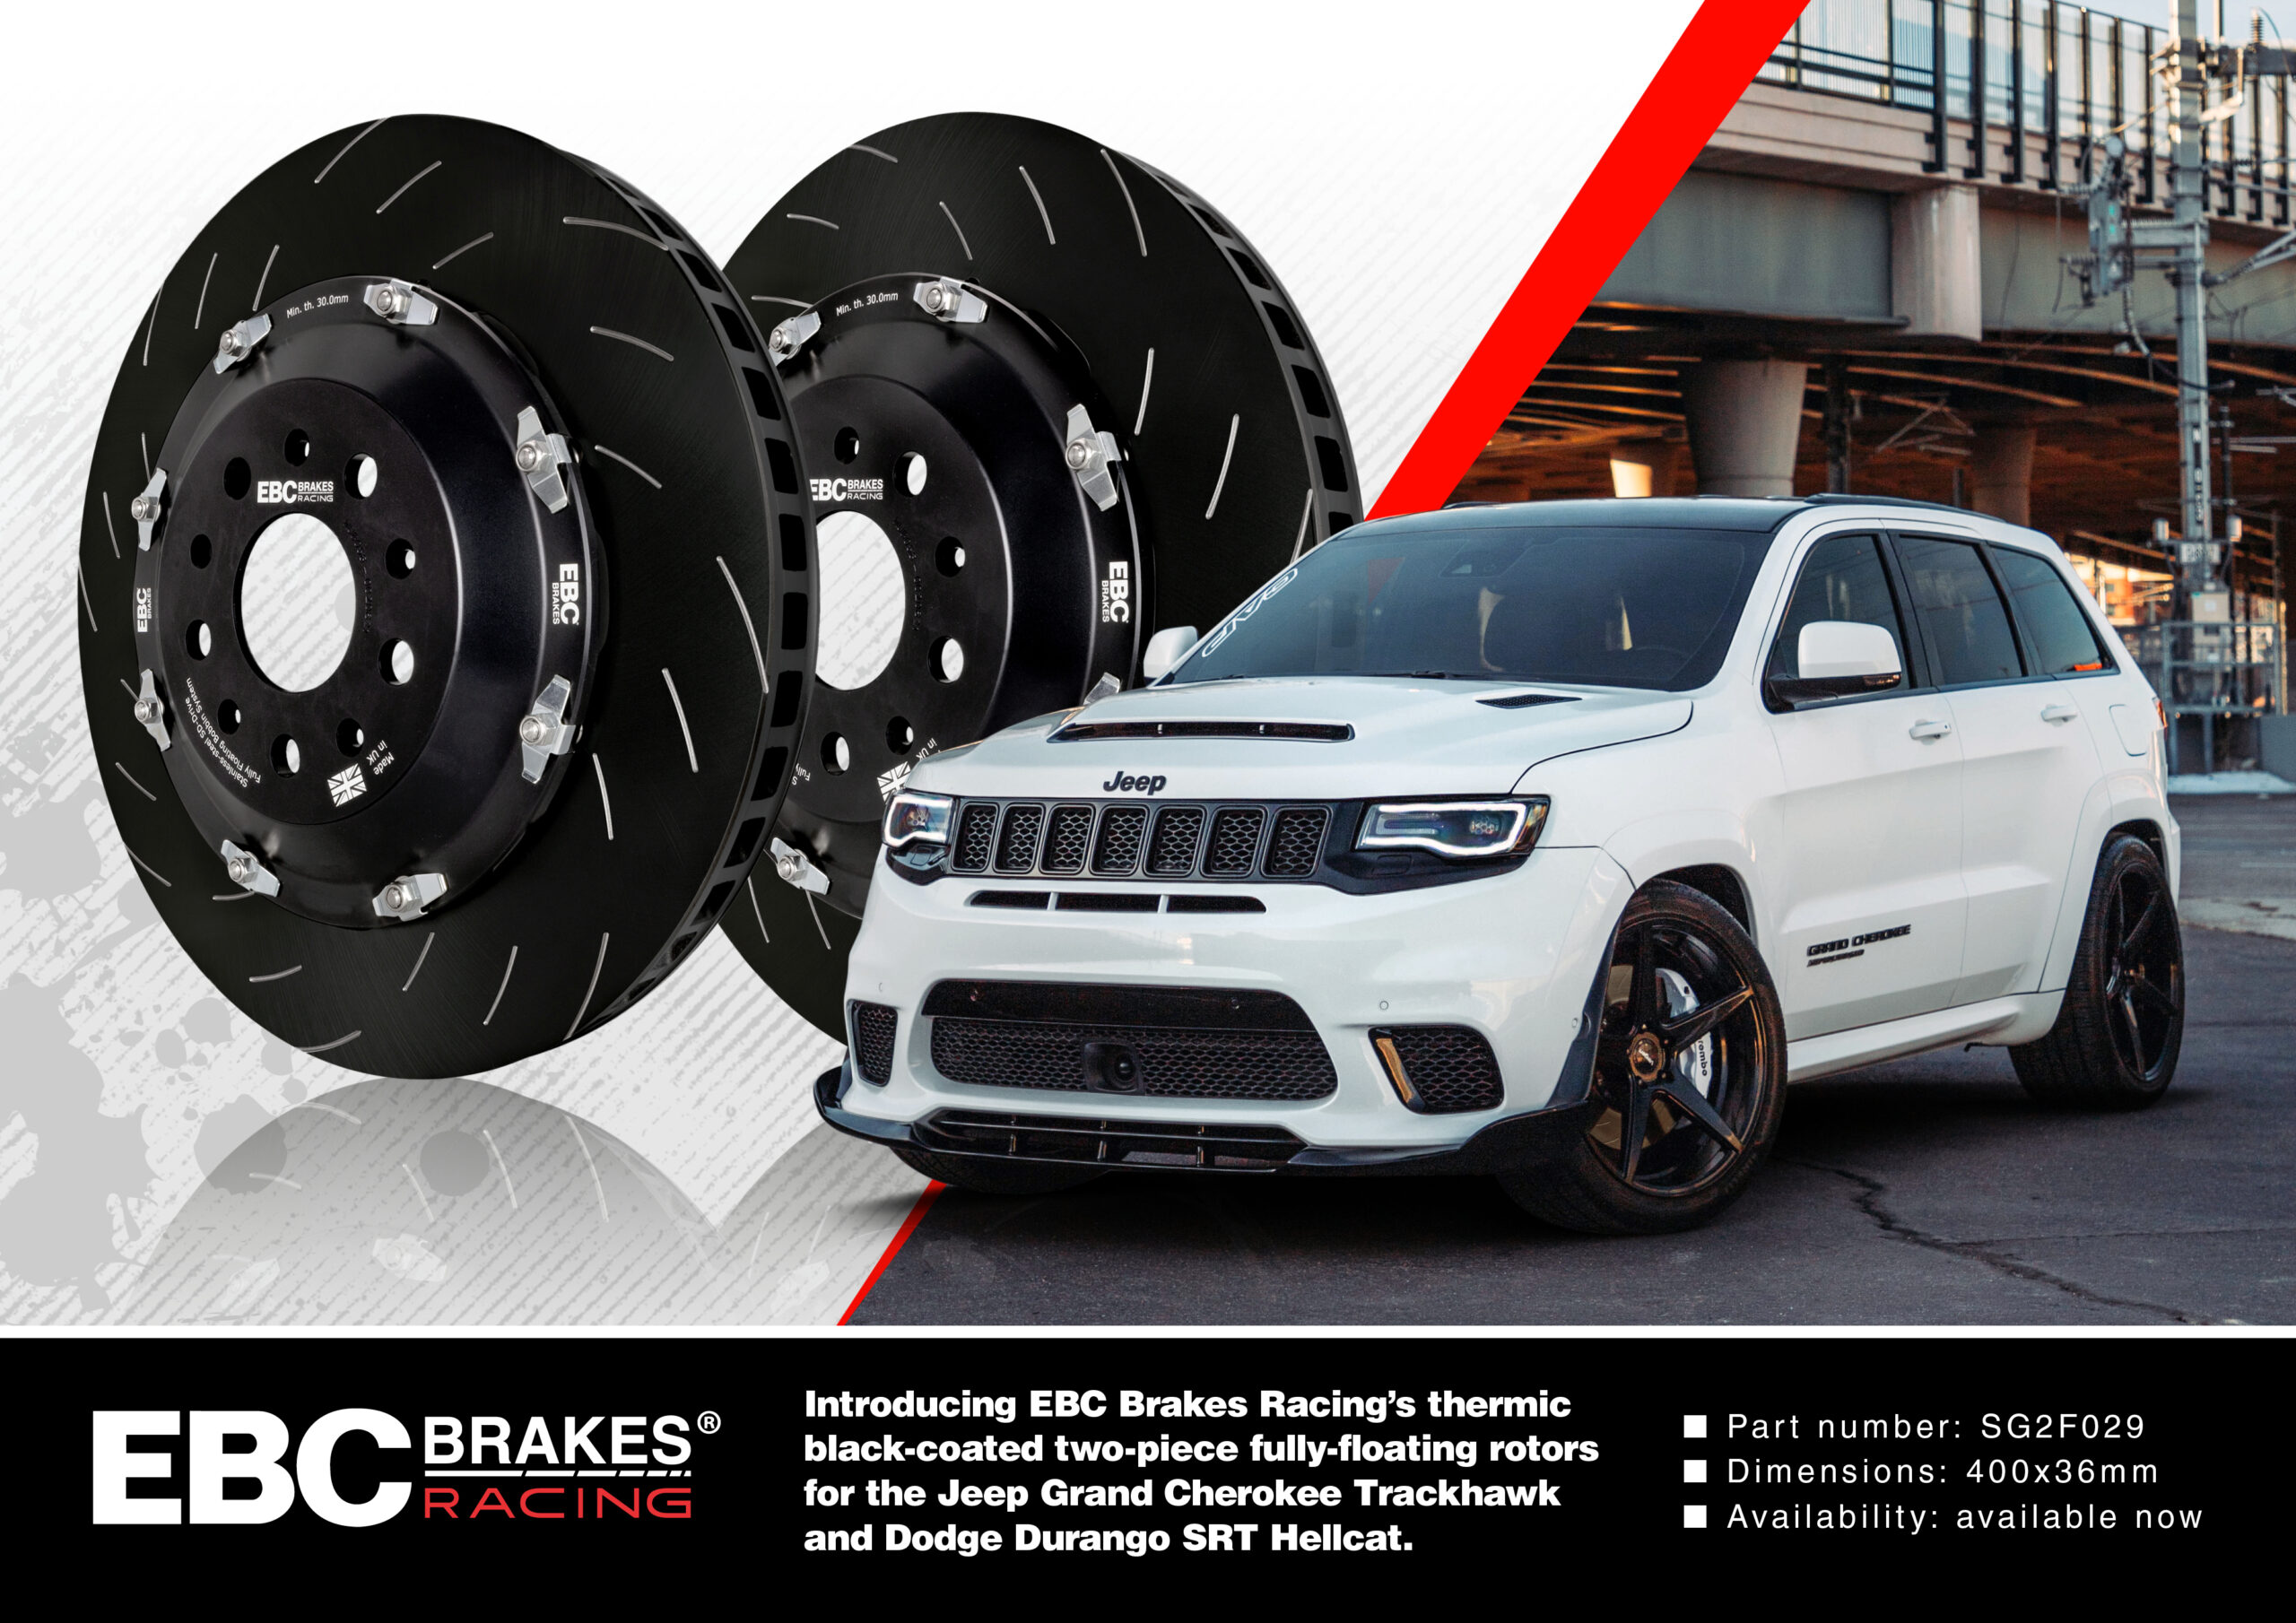 Now Available: EBC Brakes Racing Fully Floating Two-Piece Rotors for Jeep Grand Cherokee Trackhawk/Dodge Durango SRT Hellcat